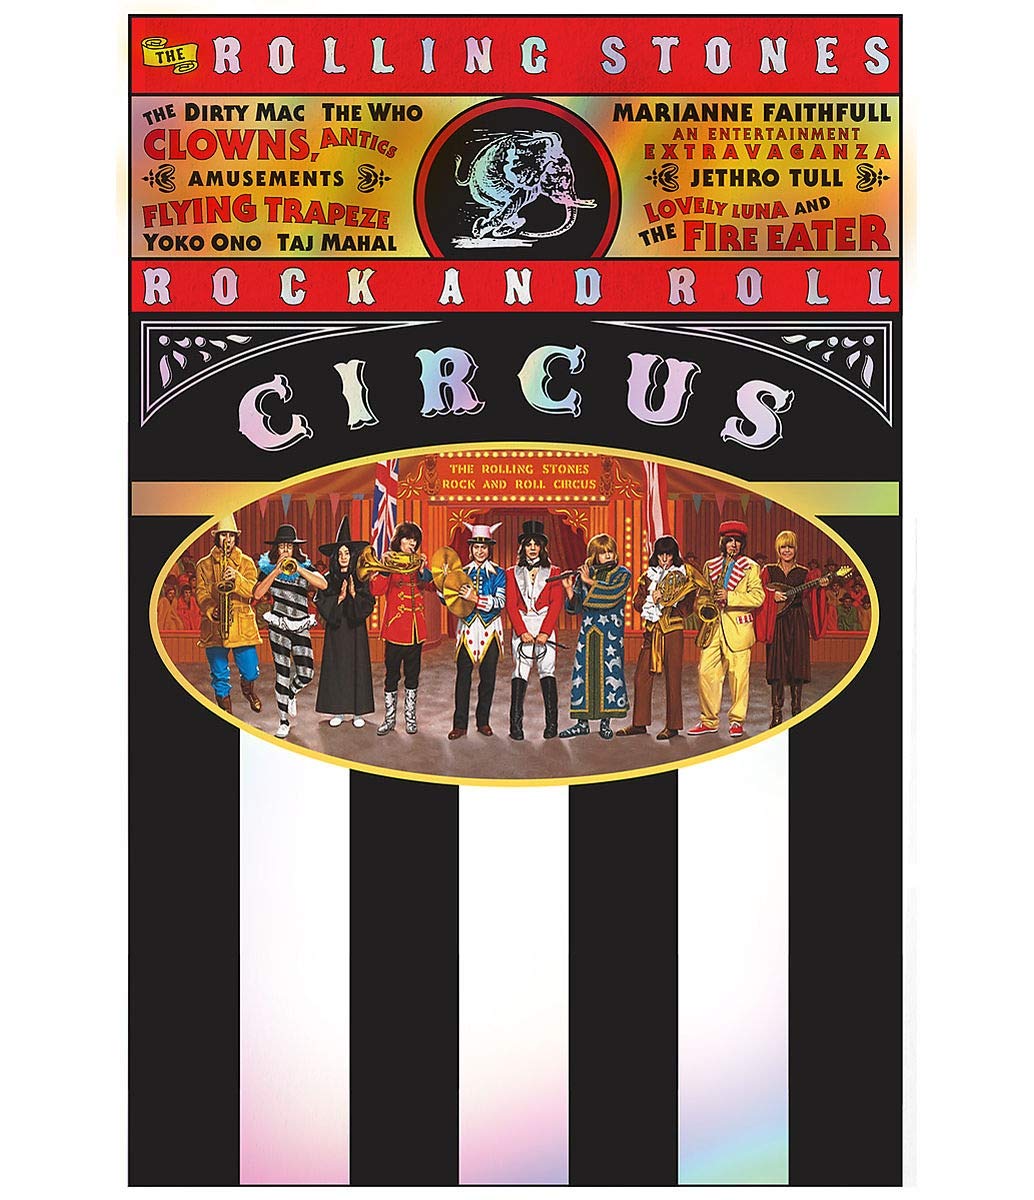 CD Shop - RUZNI/POP INTL THE ROLLING STONES ROCK AND ROLL CIRCUS